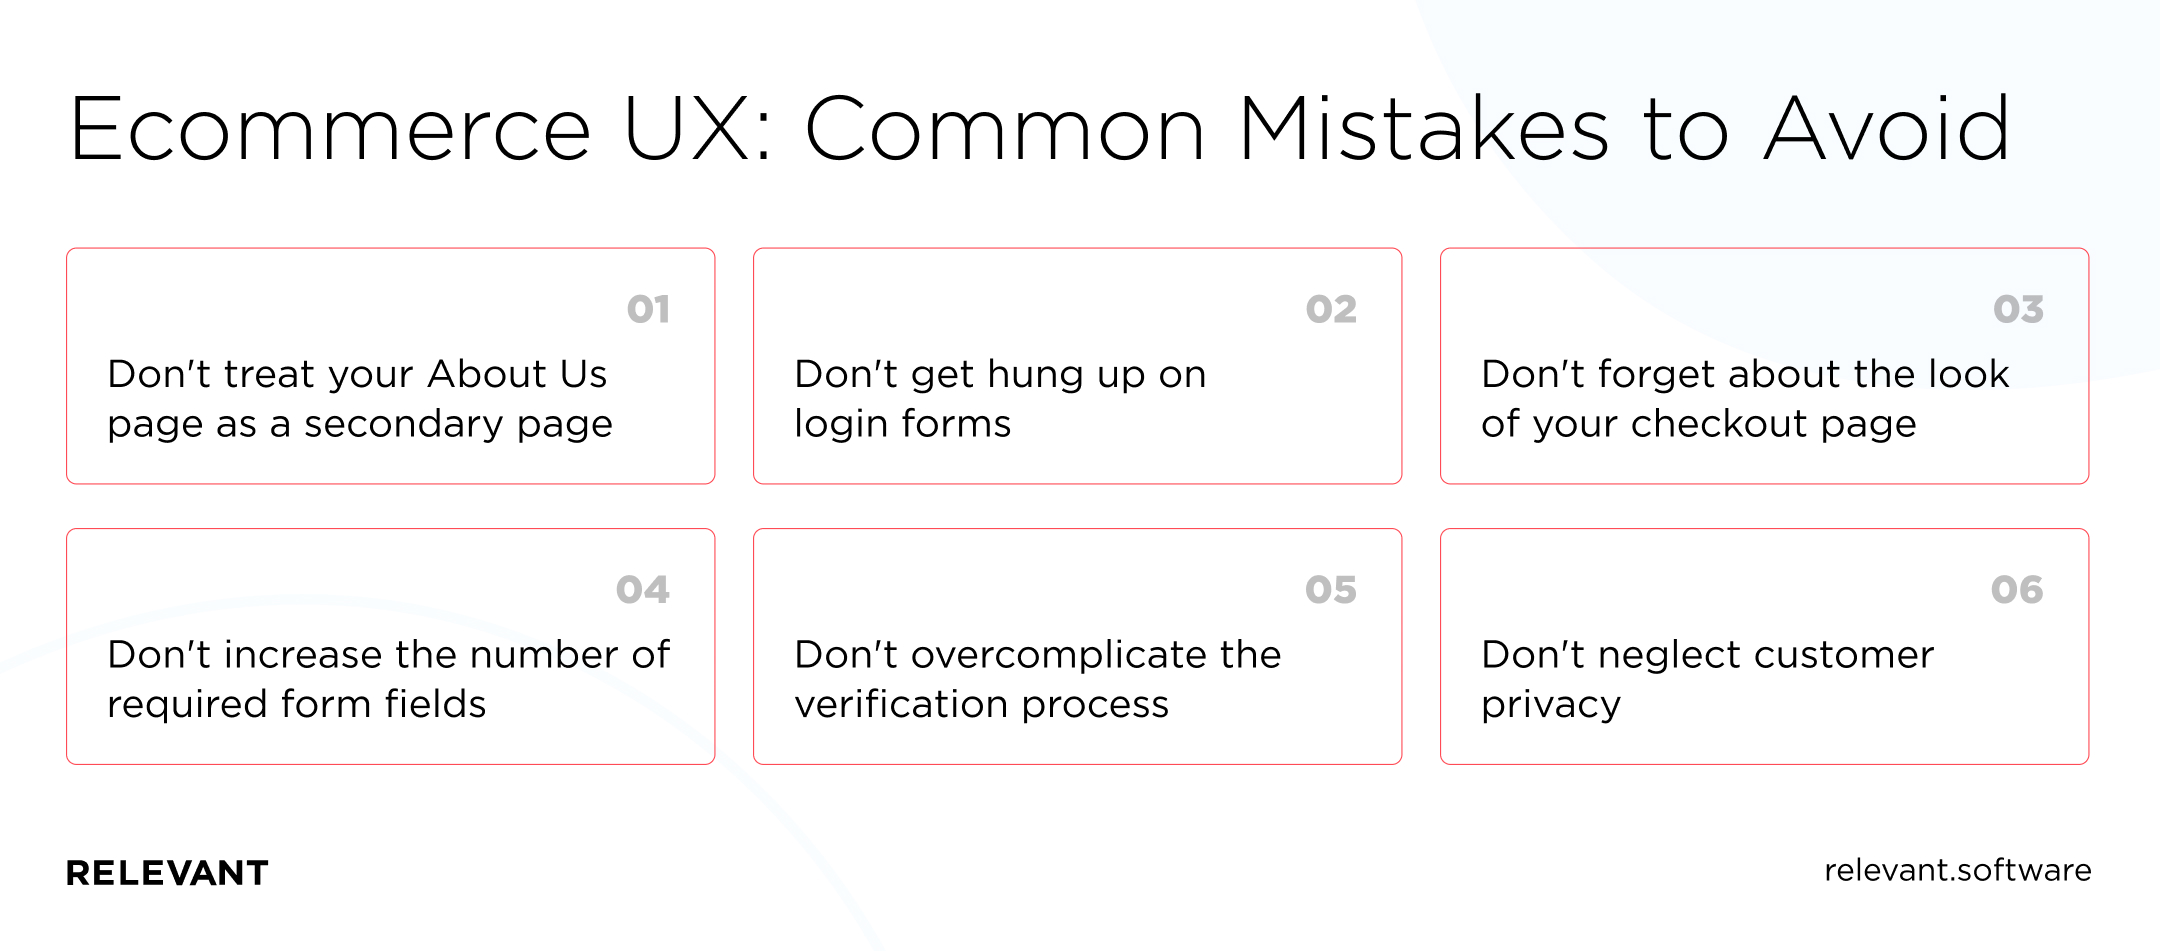 Ecommerce UX: Common Mistakes to Avoid